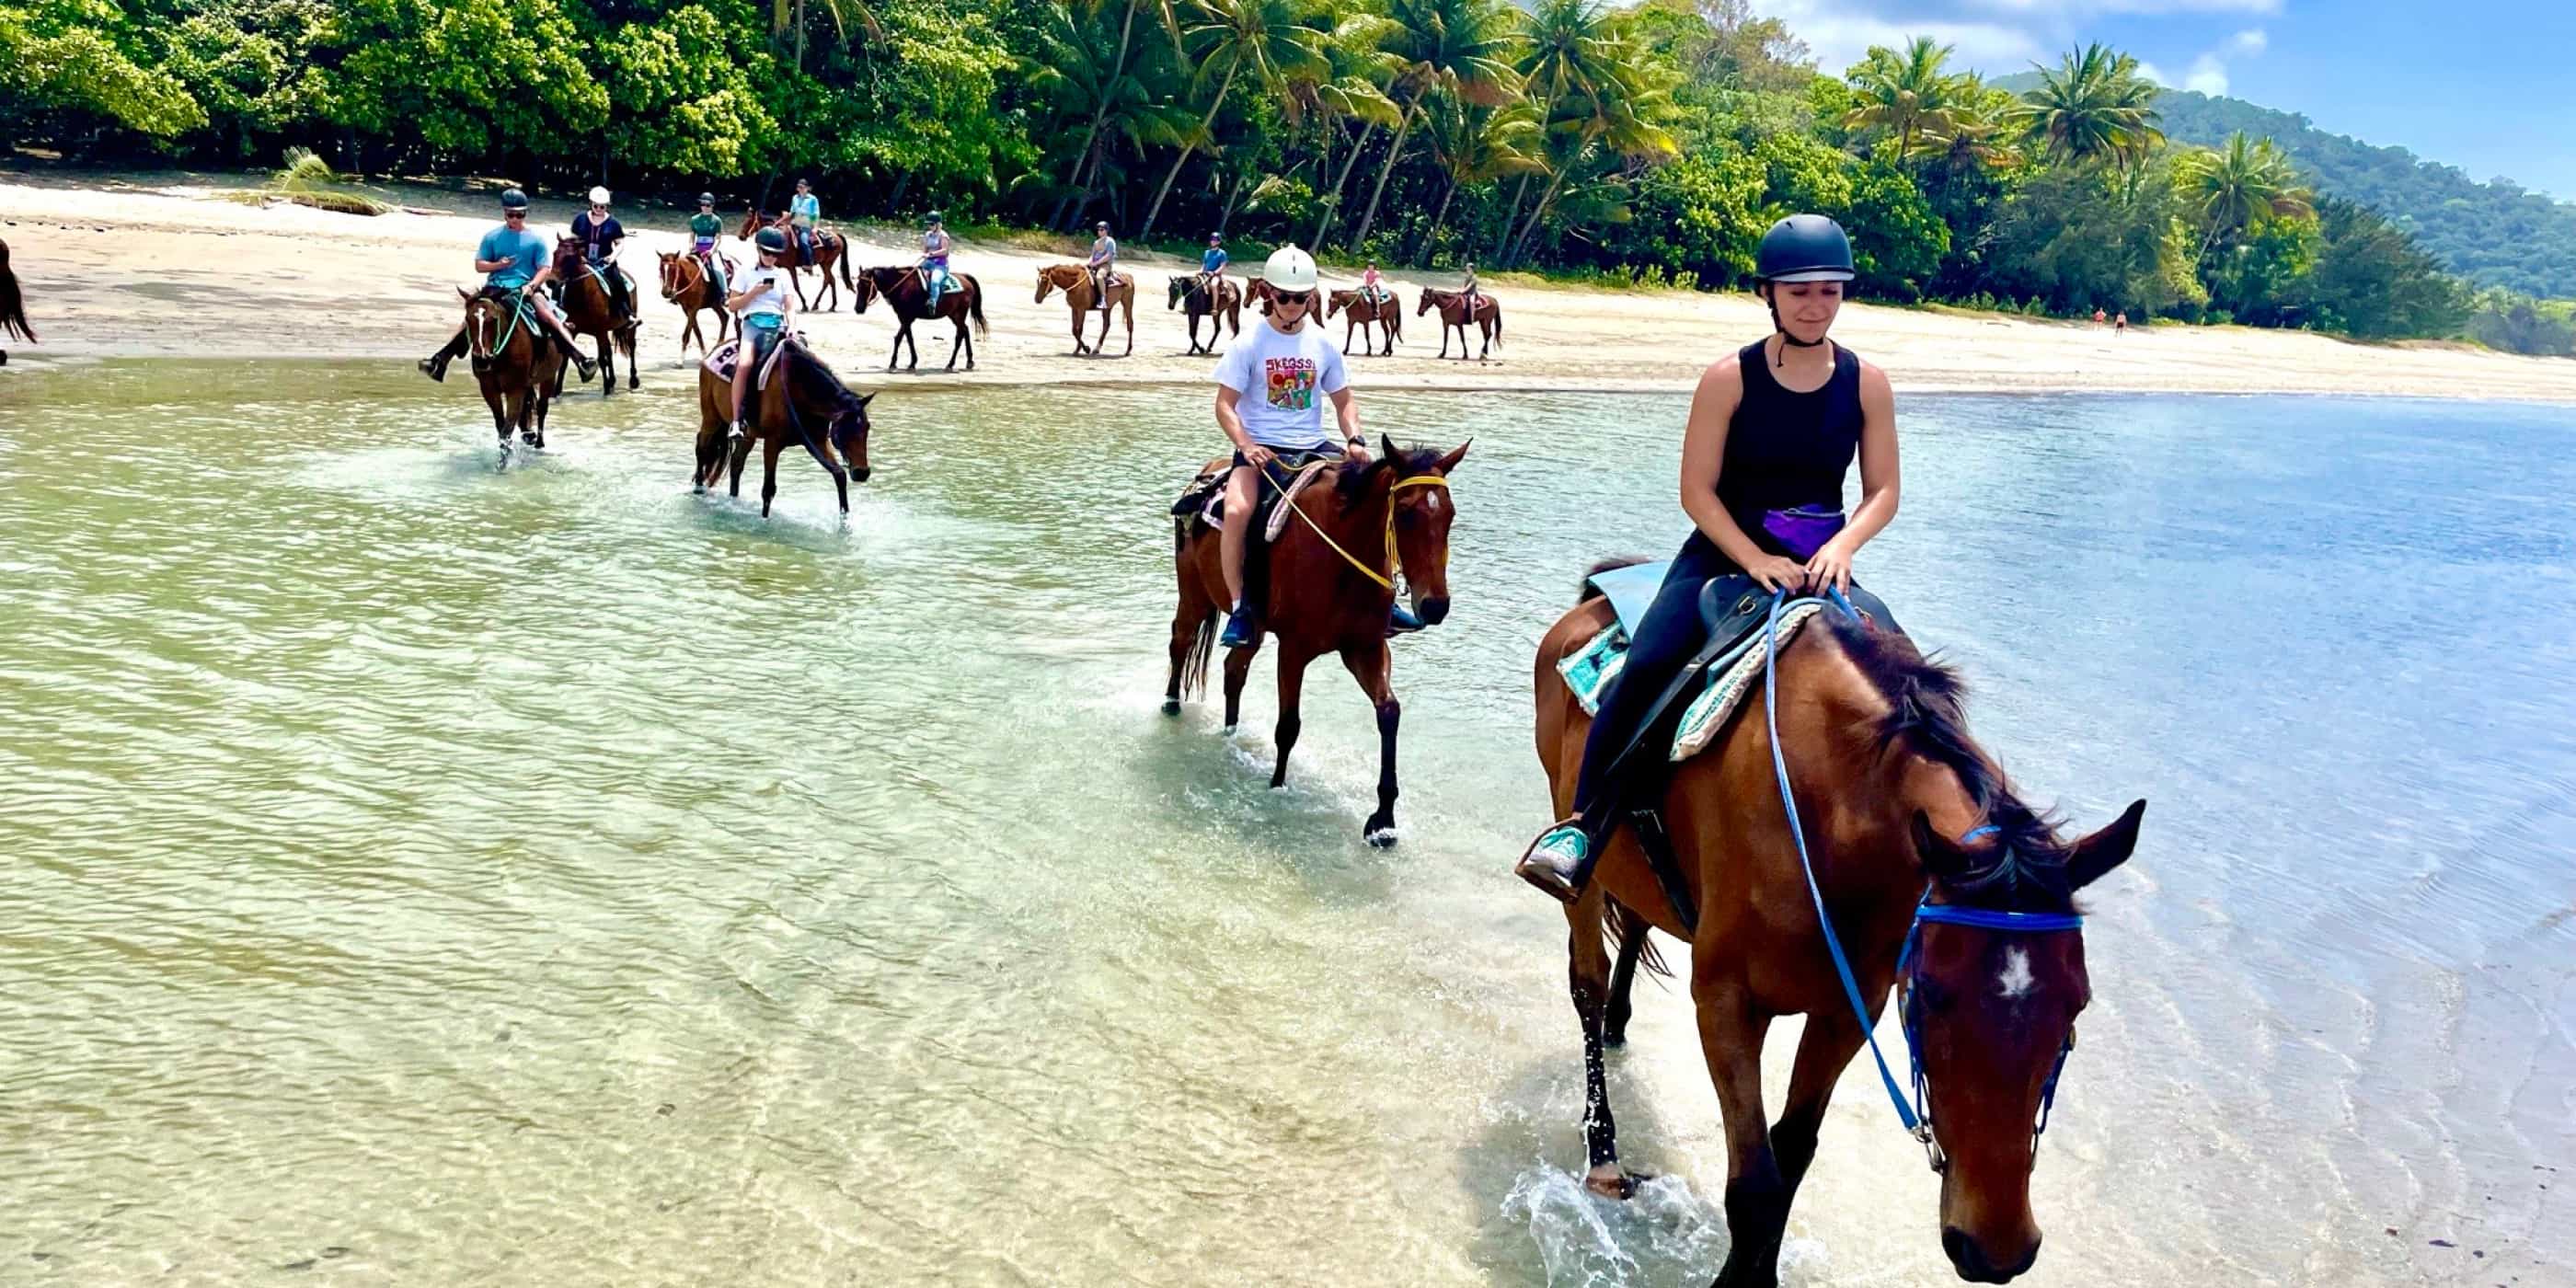 Rainforest Riding in Dominica, Caribbean | Horseback Riding - Rated 0.9